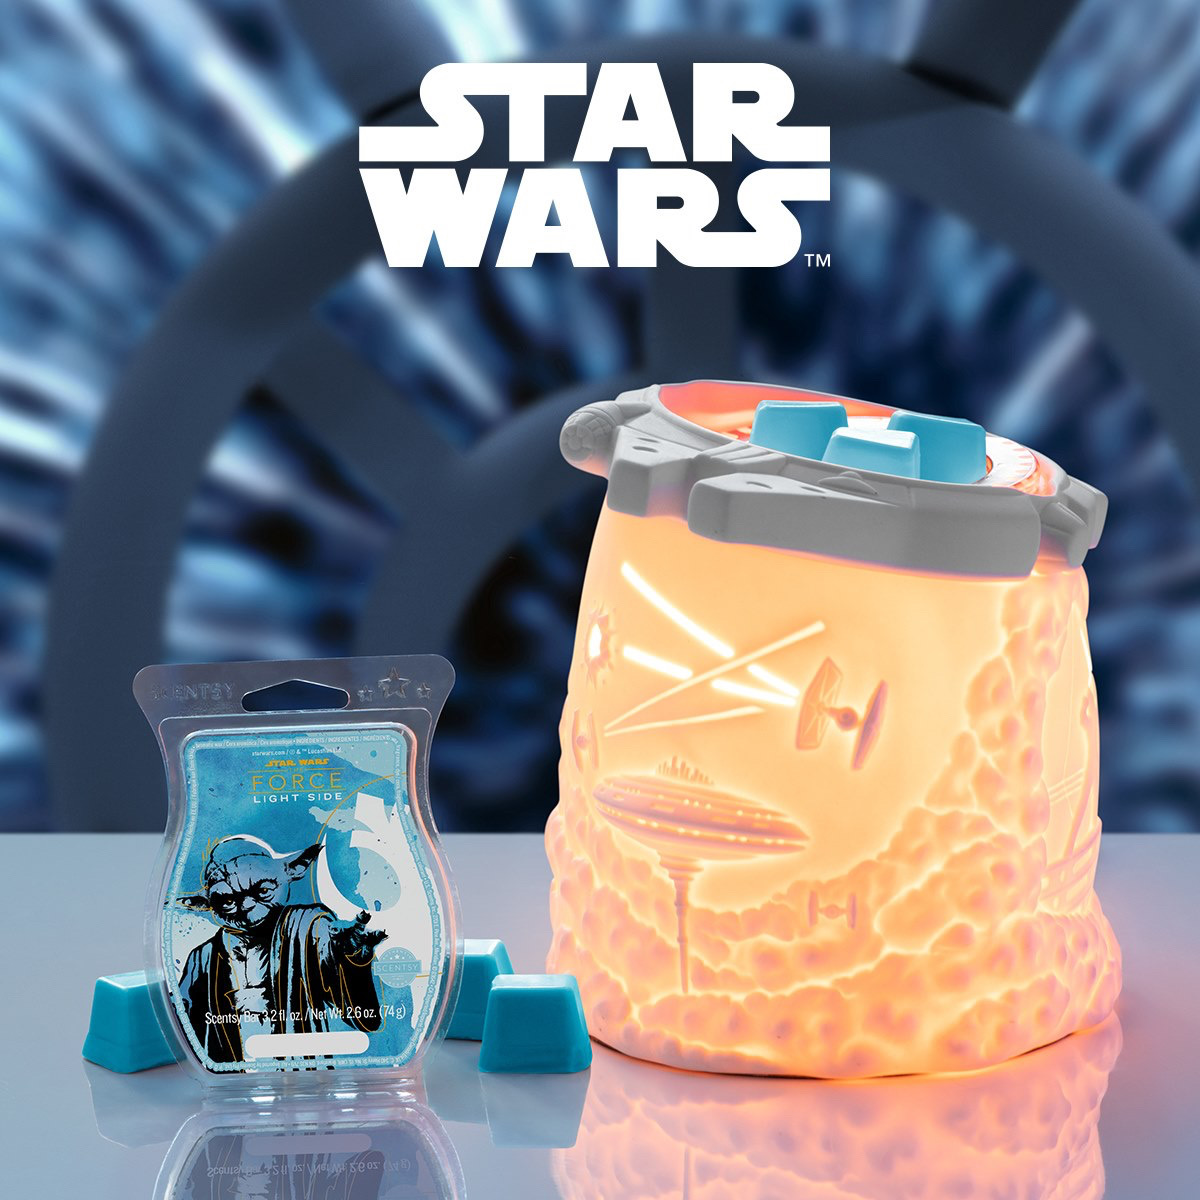 Scentsy Debuts "Light Side of the Force" Star Wars Collection